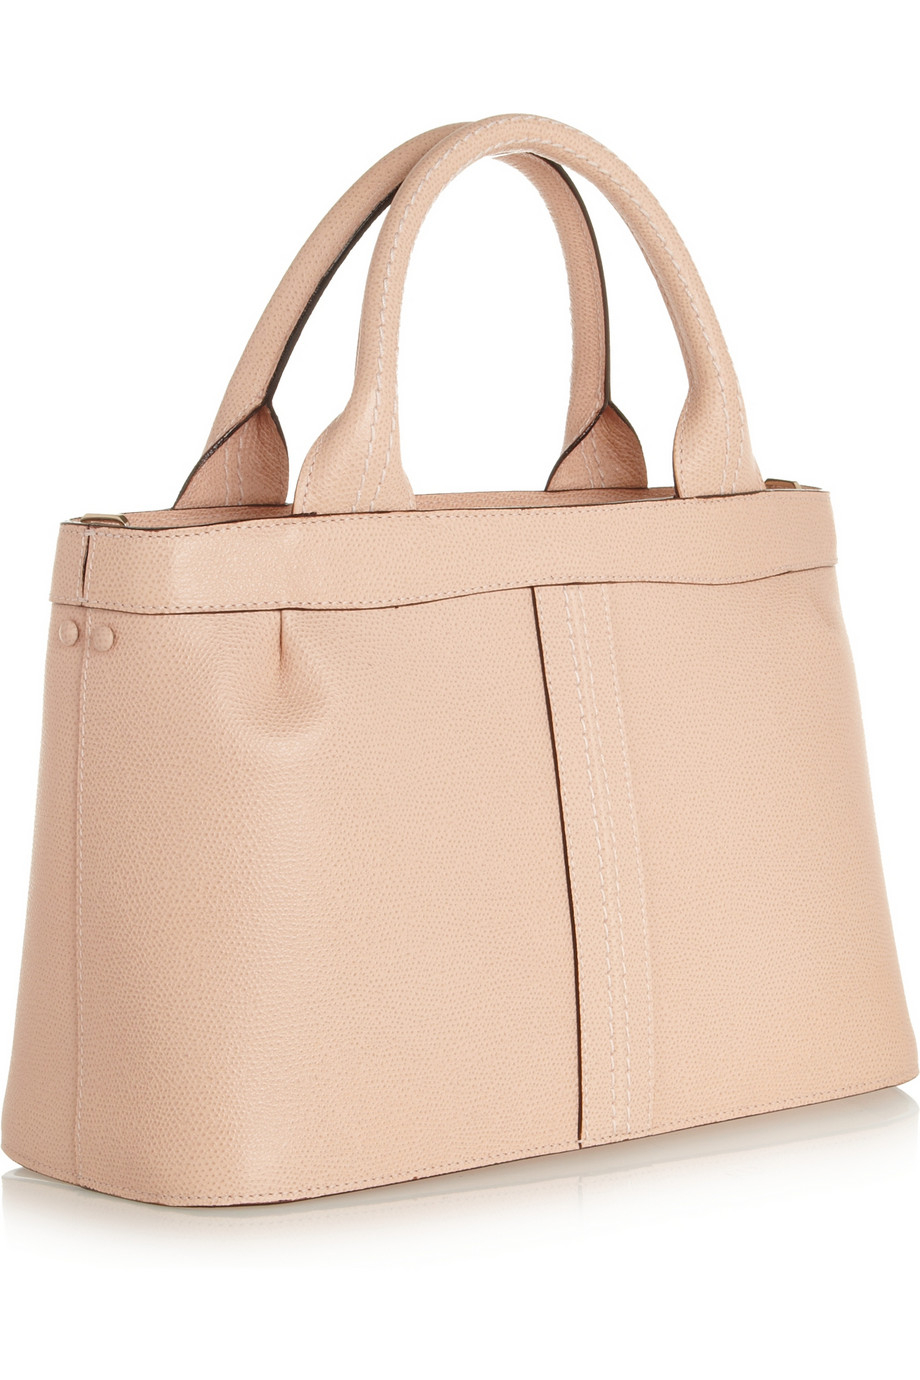 Lyst - Valextra Textured-leather Tote in Pink